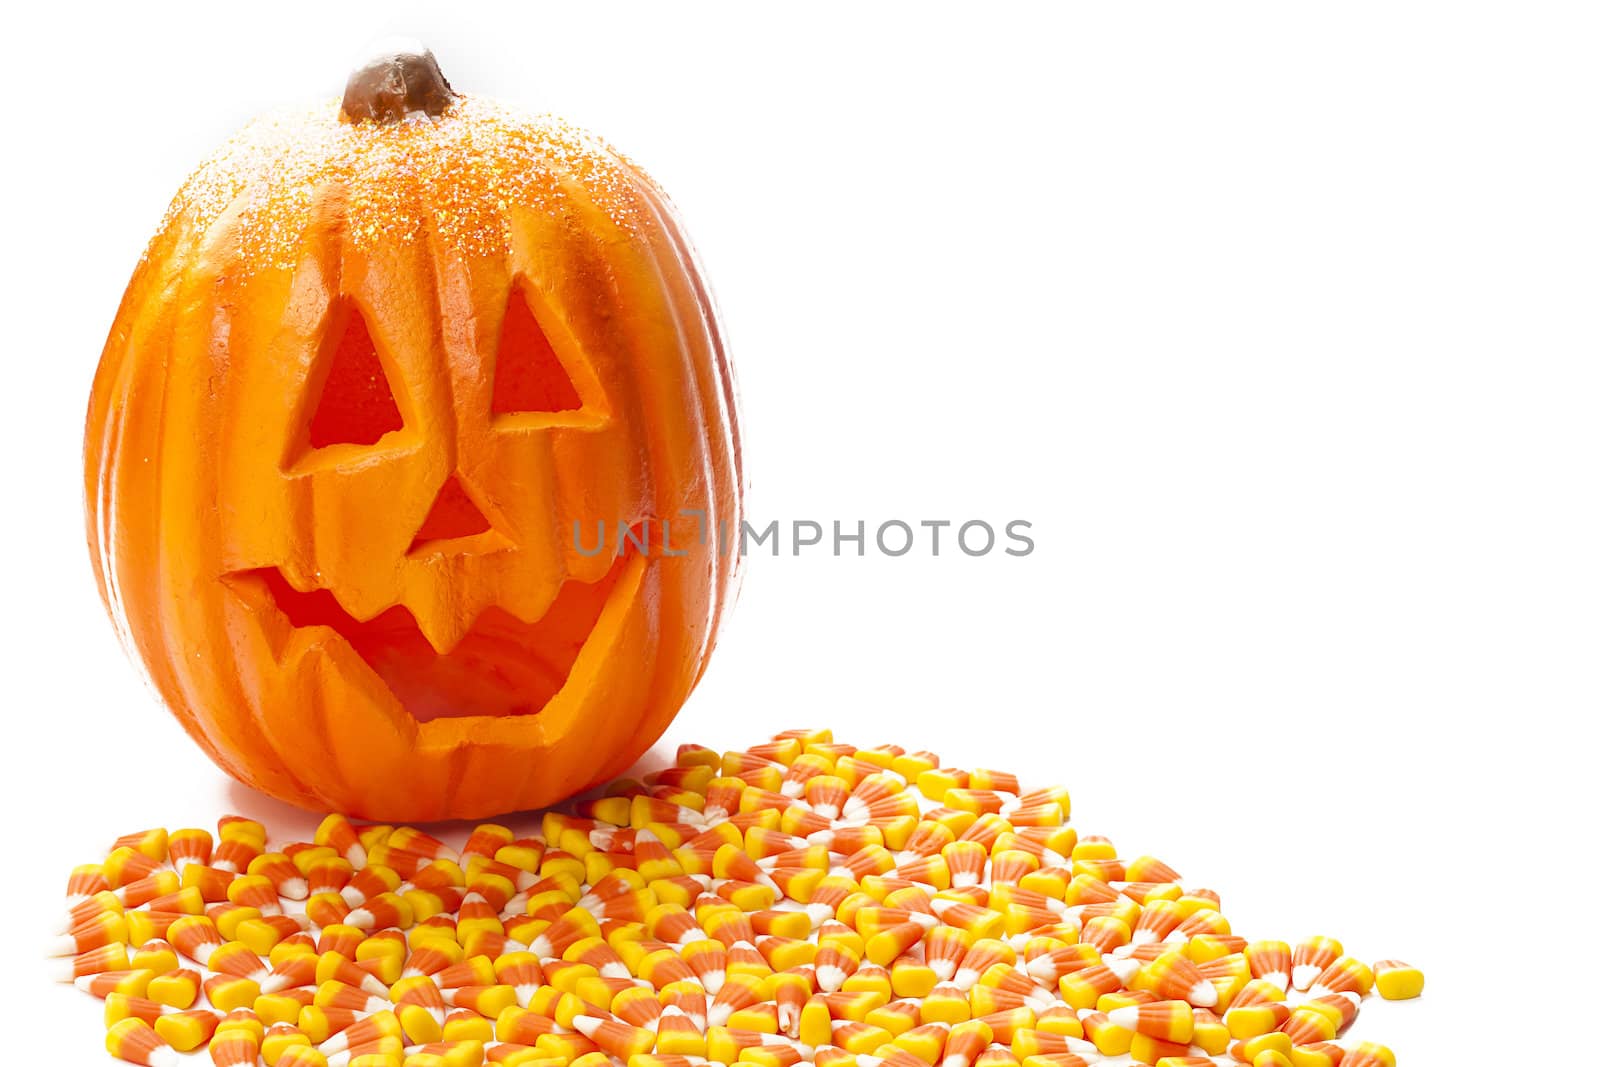 Jack o lantern with candy corn infornt of it.